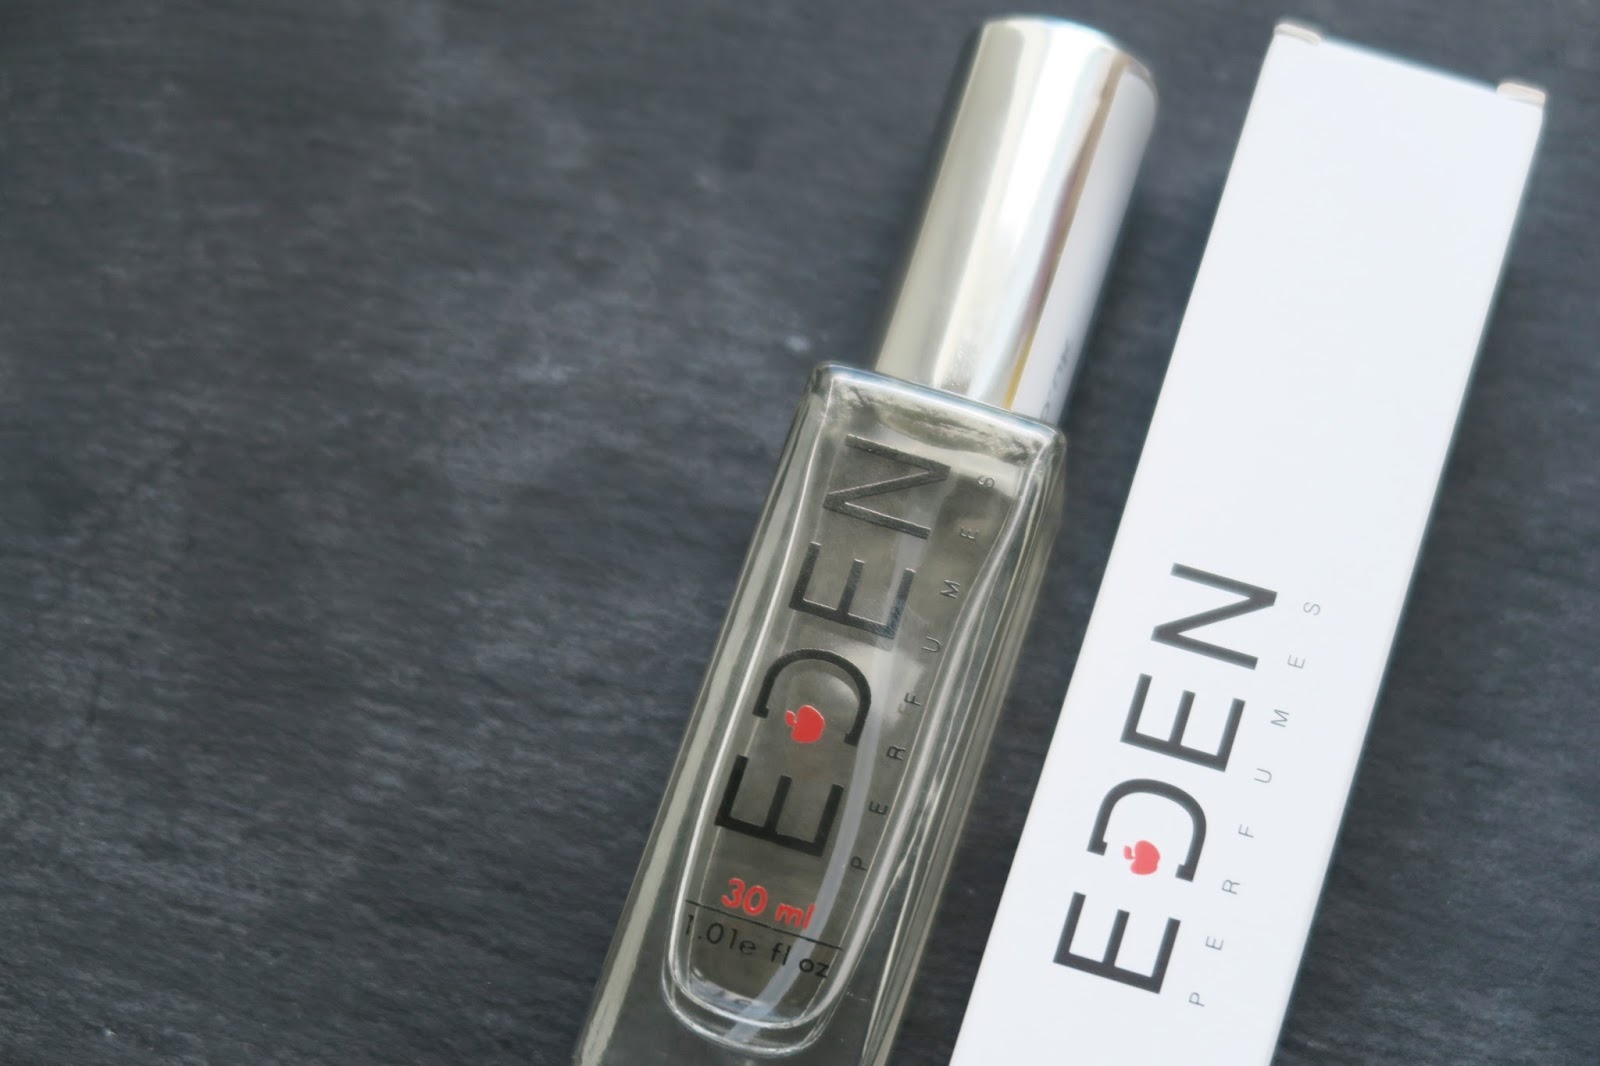 Eden Perfumes Cruelty Free Flowerbomb Dupe Review